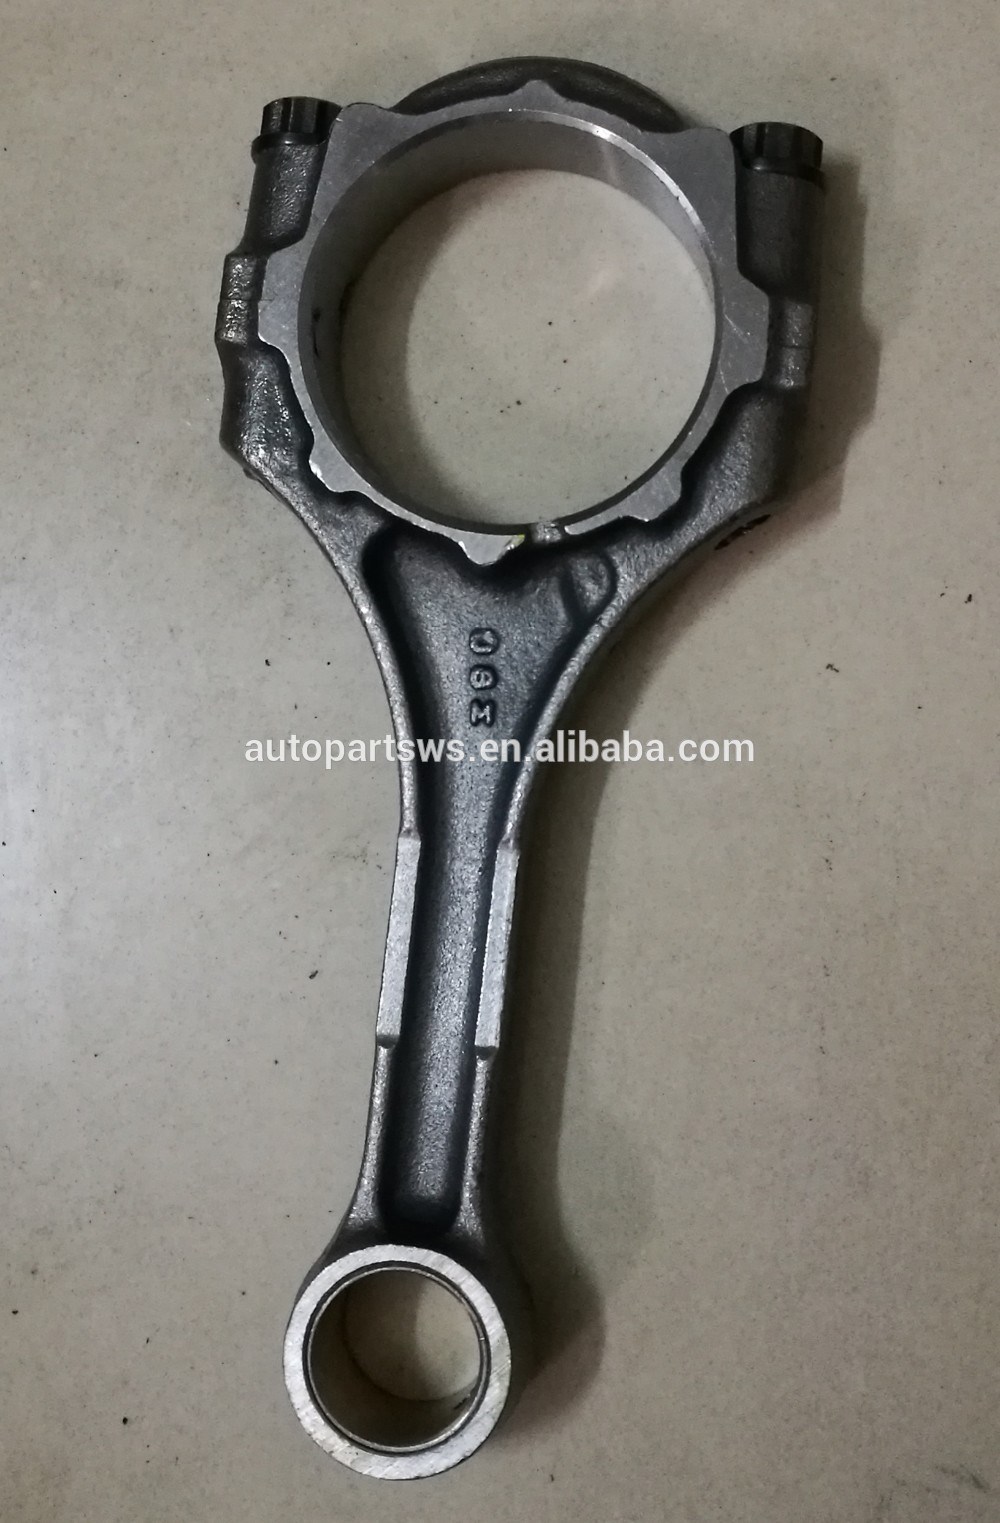 Auto Spare Parts Connecting Rod 13201-09301 for Toyota 1tr